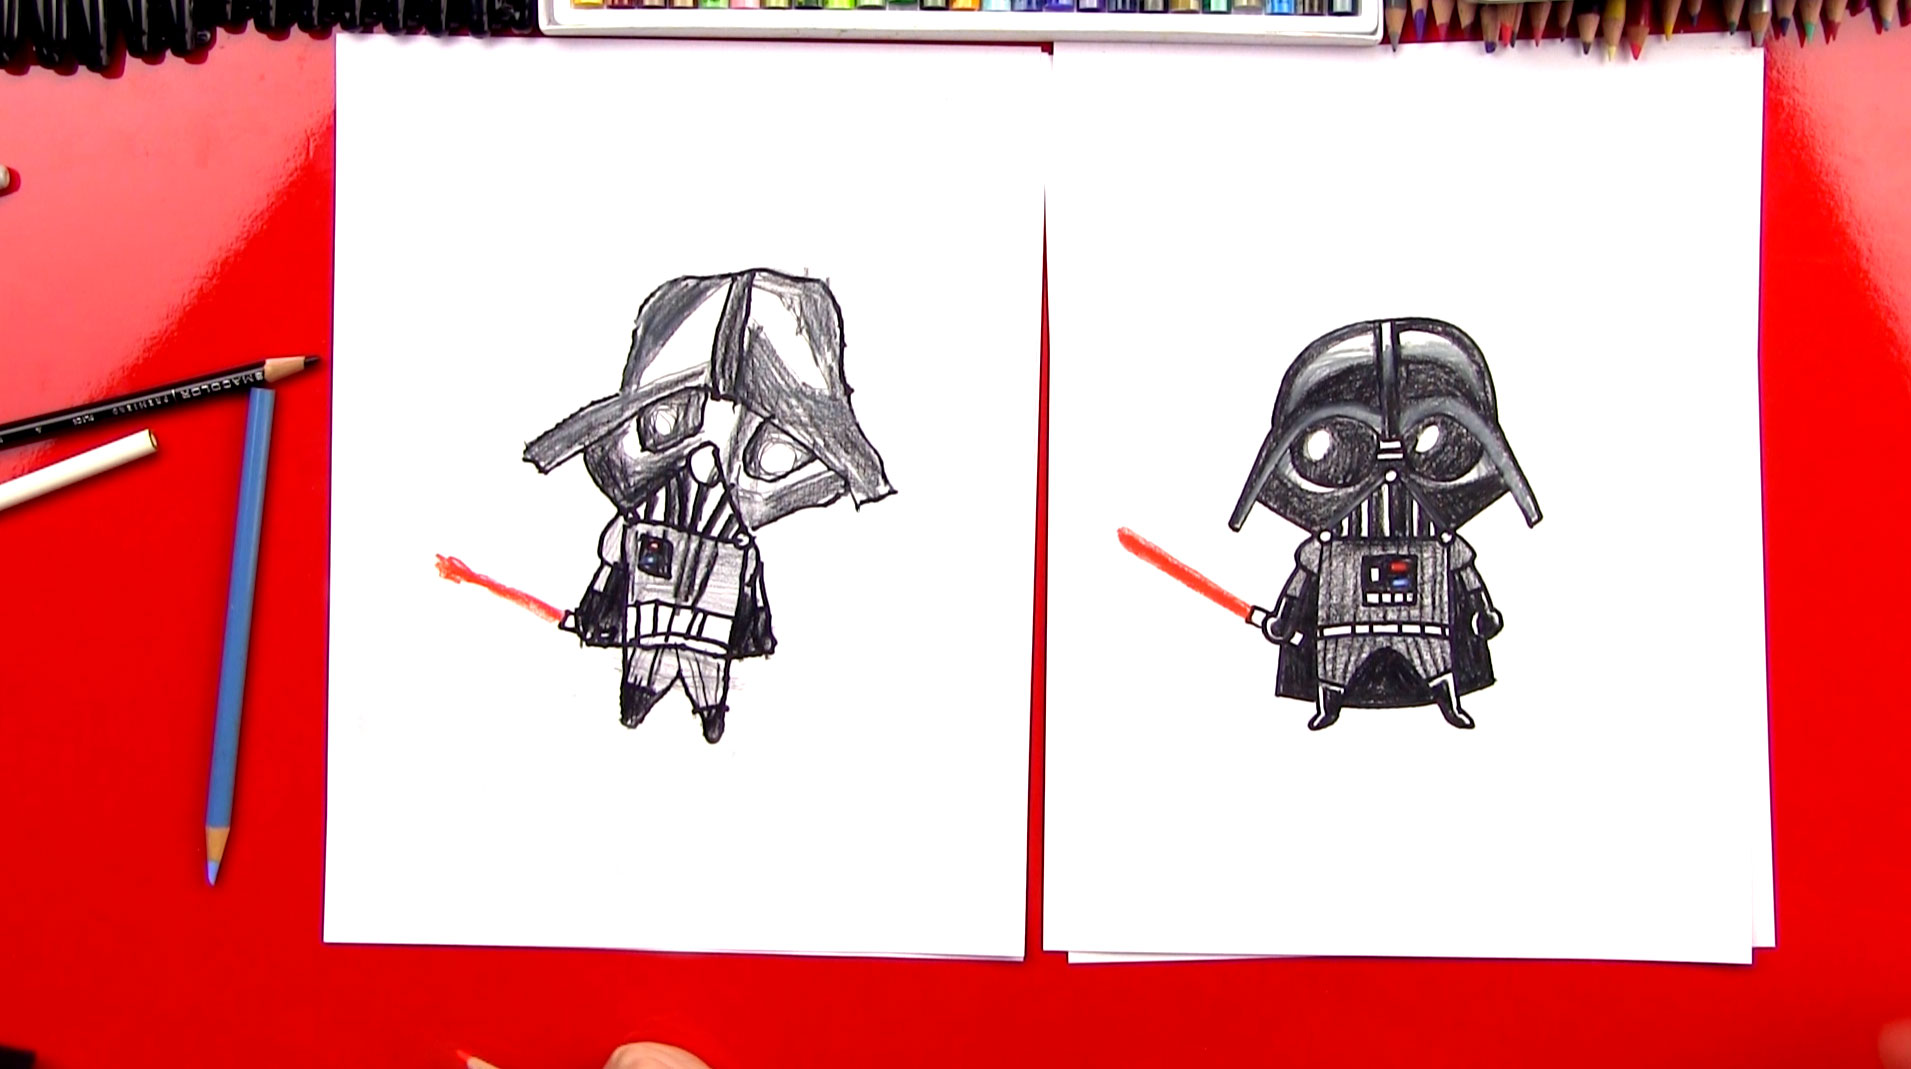 How to Draw Darth Vader